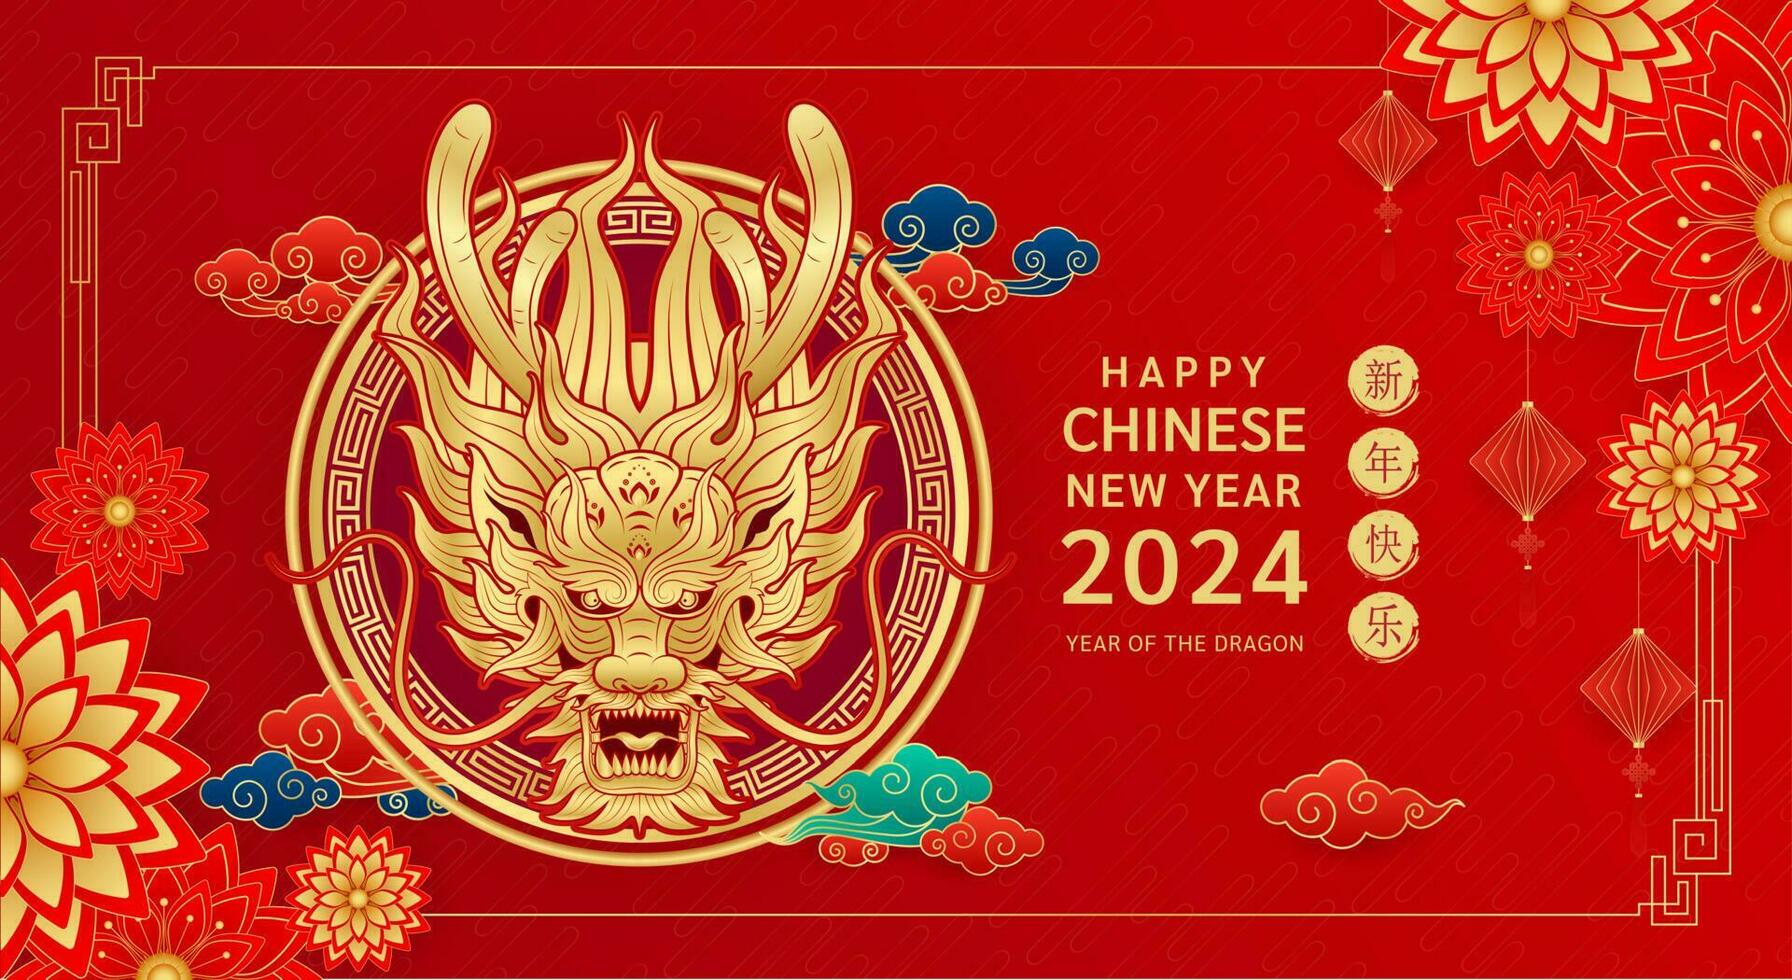 Happy Chinese New Year 2024. Chinese dragon gold zodiac sign on red background for card design. China lunar calendar animal. Translation happy new year 2024. Vector EPS10.